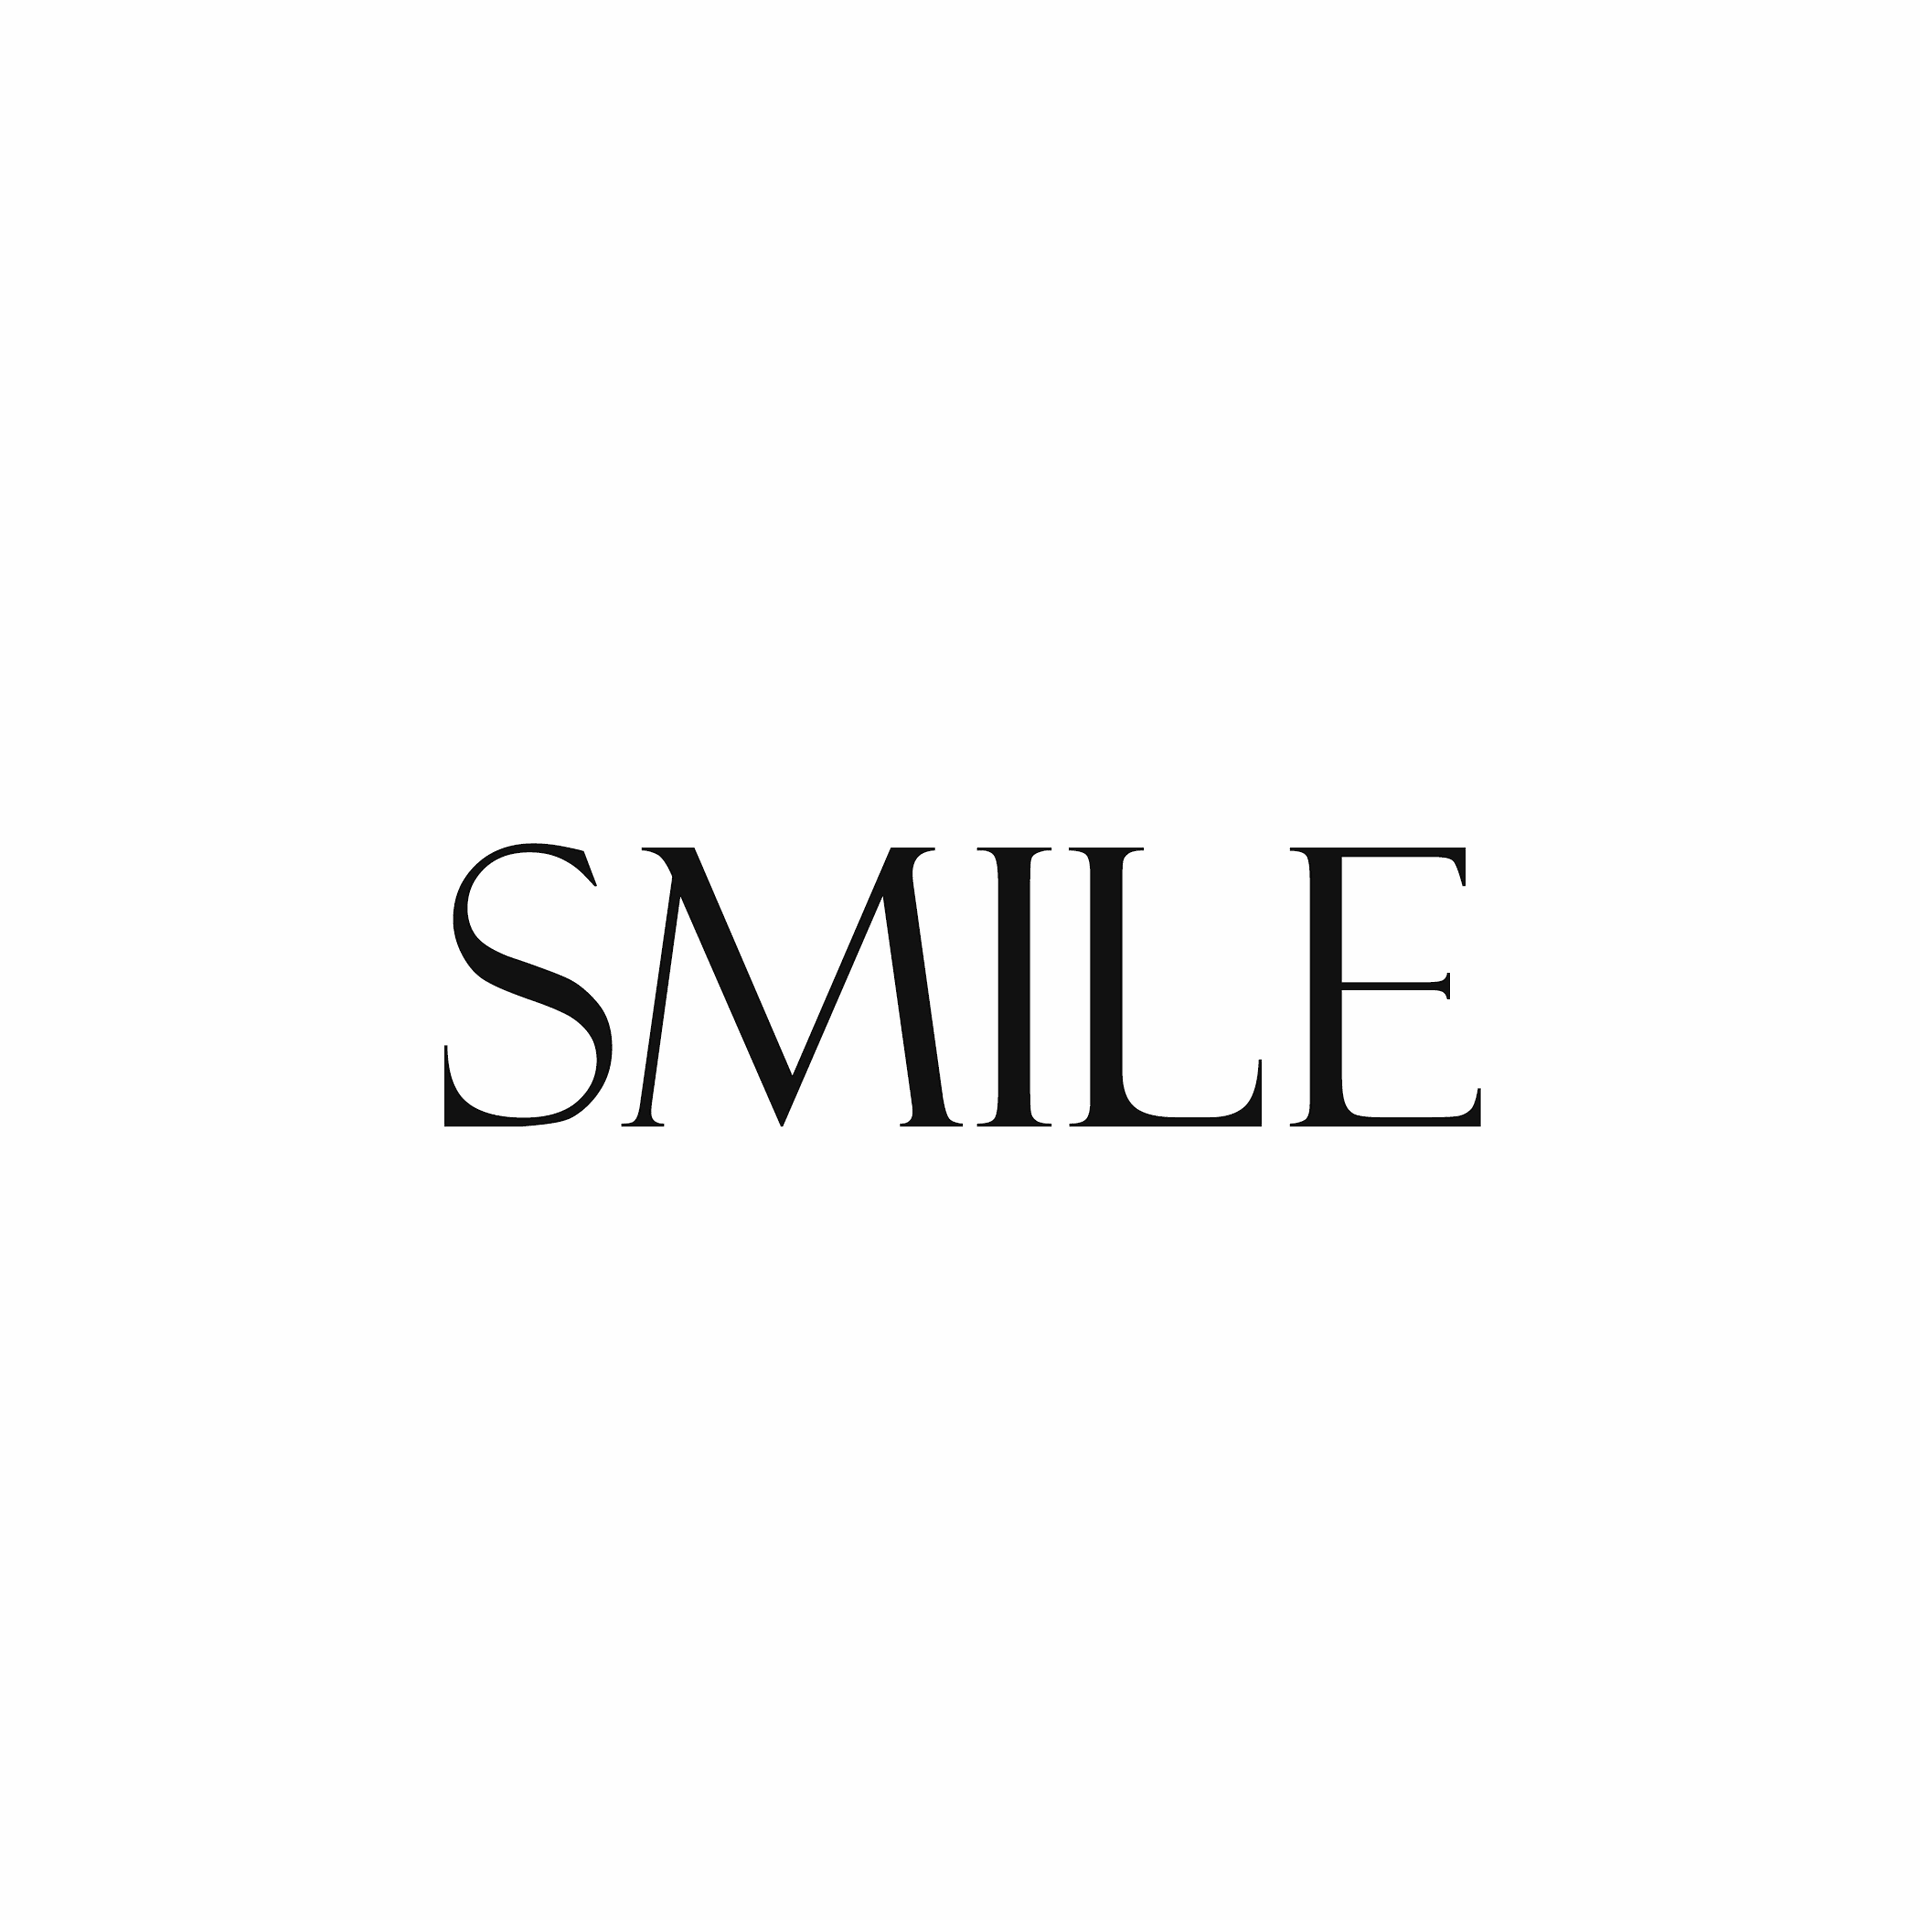 Product Brand: Smile